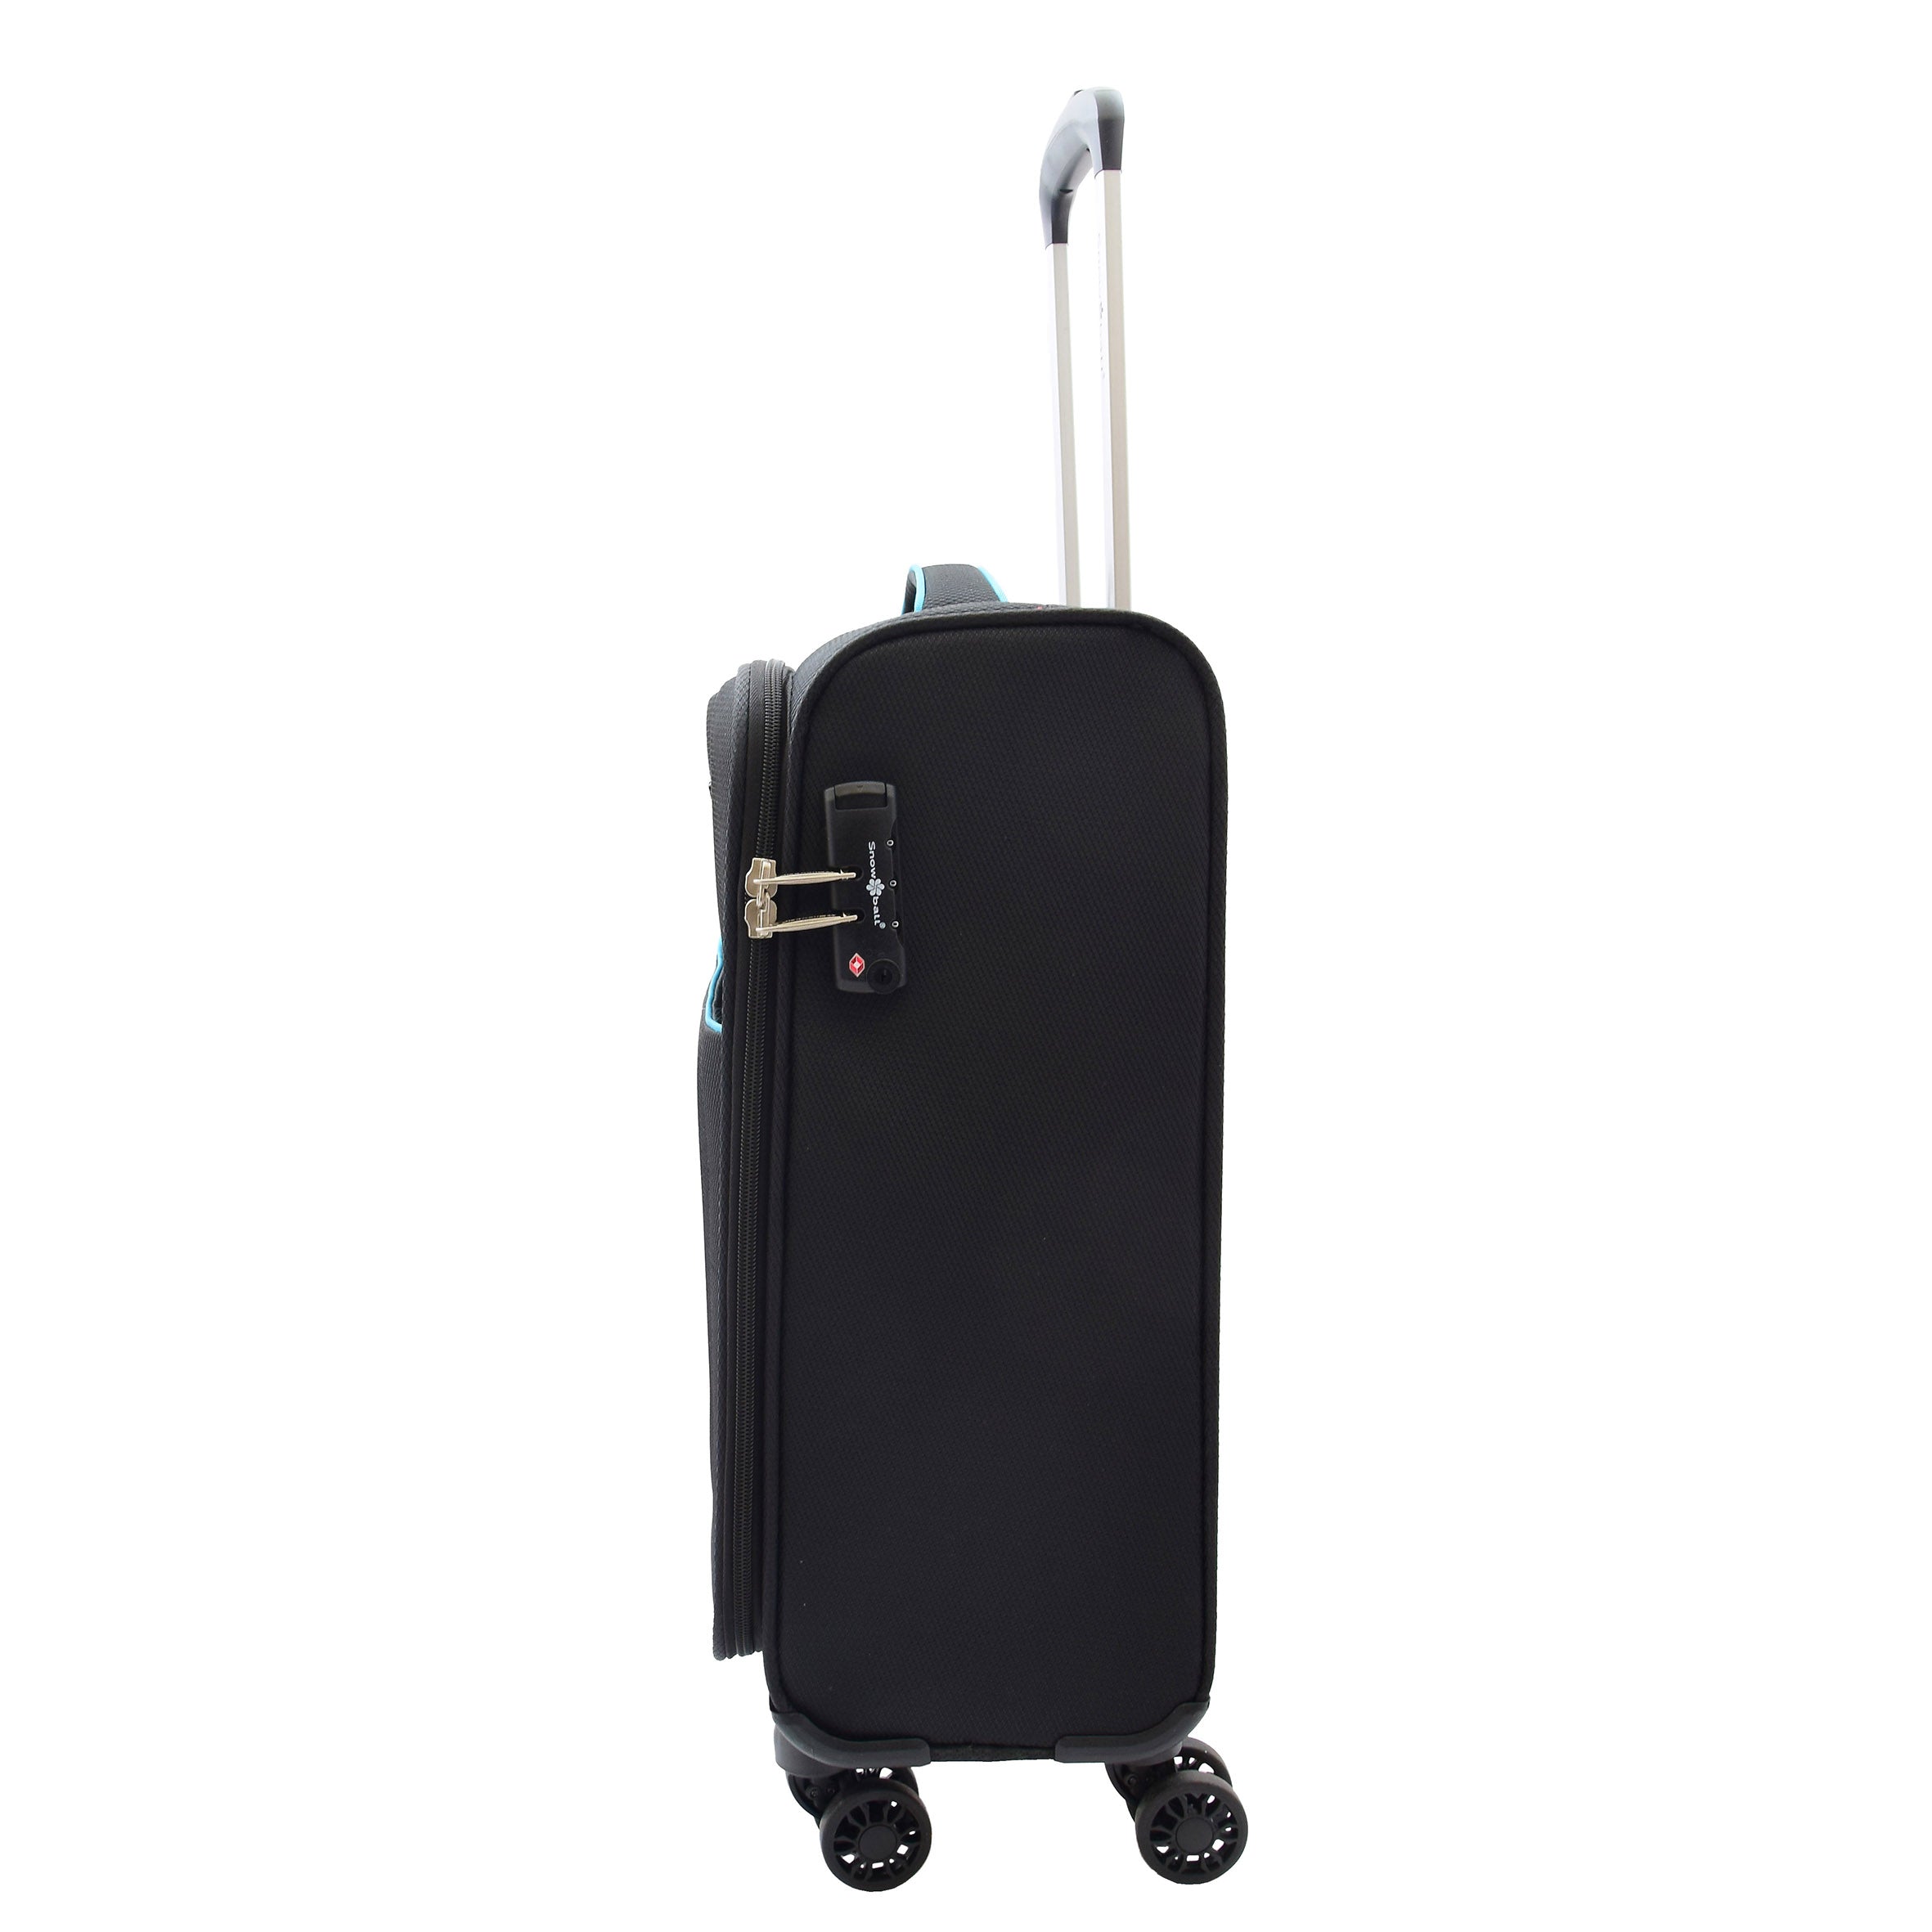 Cabin Size Suitcase 4 Wheel Luggage Lightweight | House of Leather